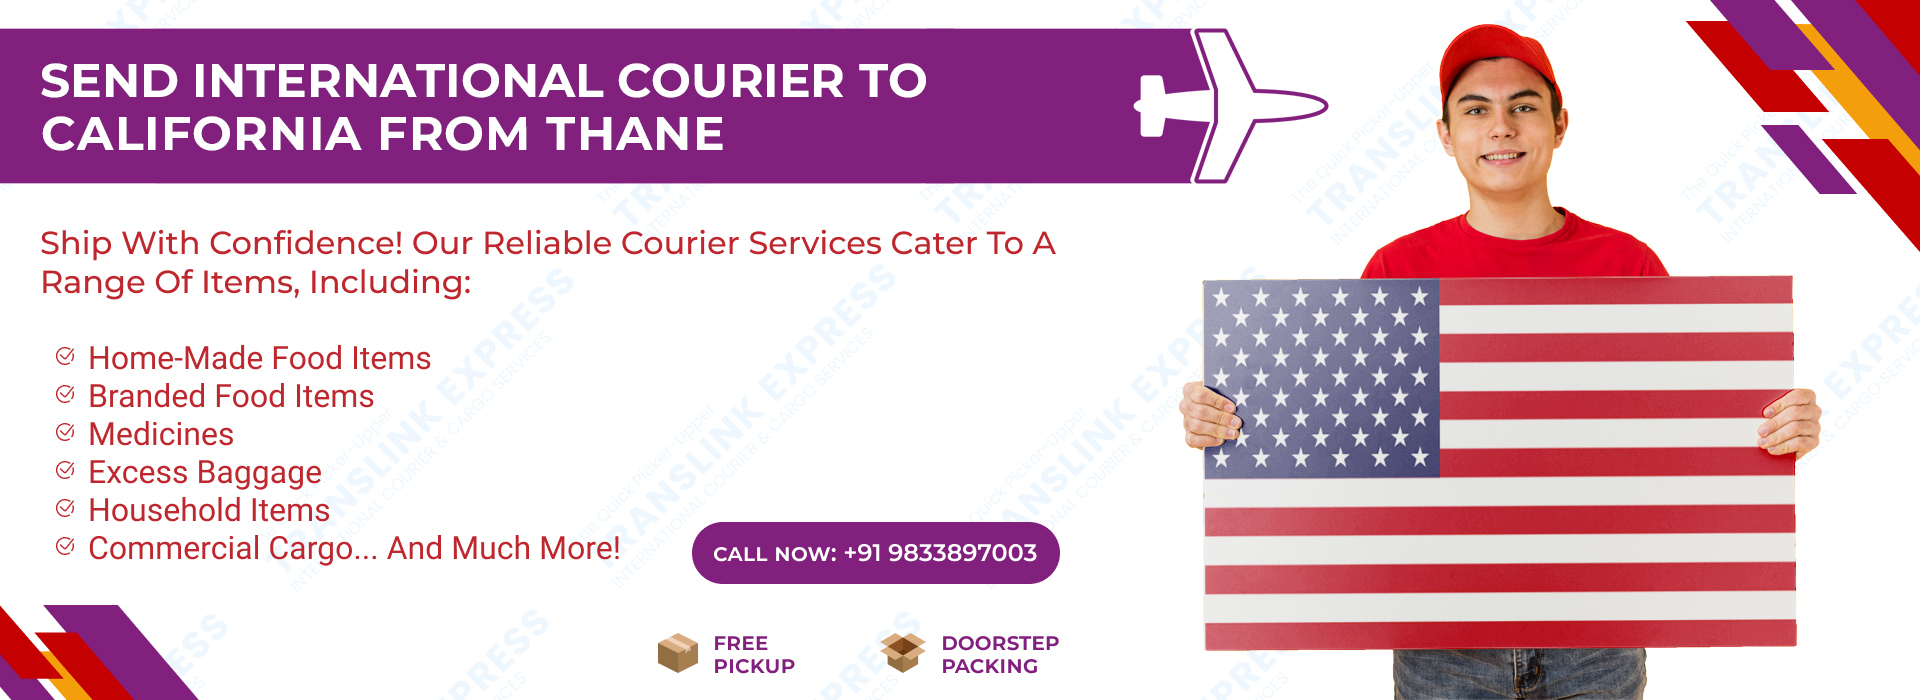 Courier to California From Thane